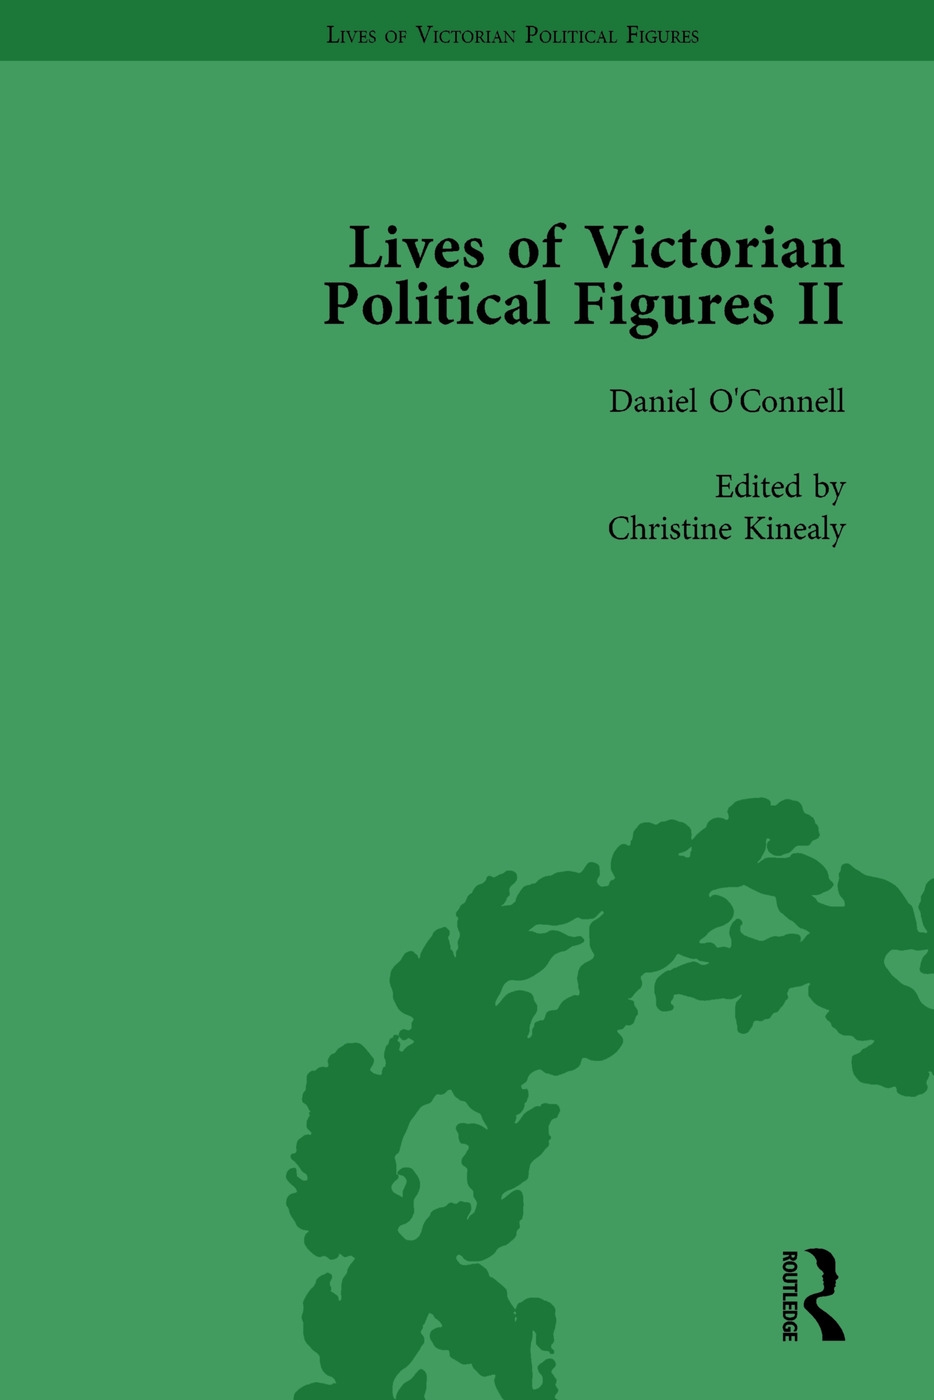 Lives of Victorian Political Figures, Part II, Volume 1: Daniel O’’Connell, James Bronterre O’’Brien, Charles Stewart Parnell and Michael Davitt by Thei